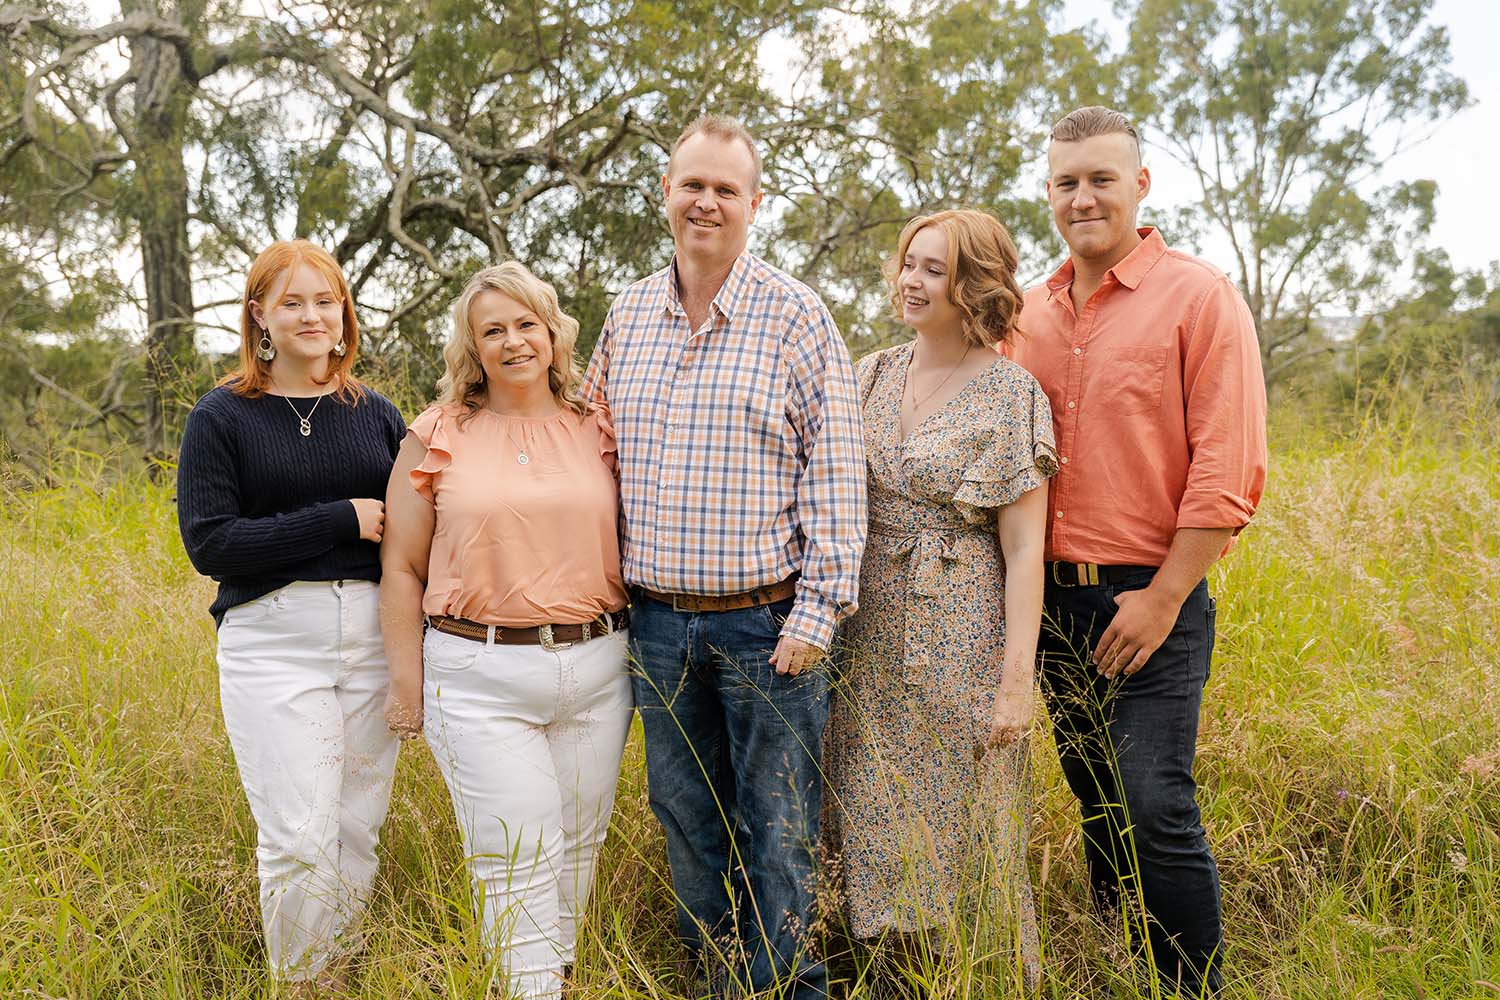 Family Photography Toowoomba - family standing together